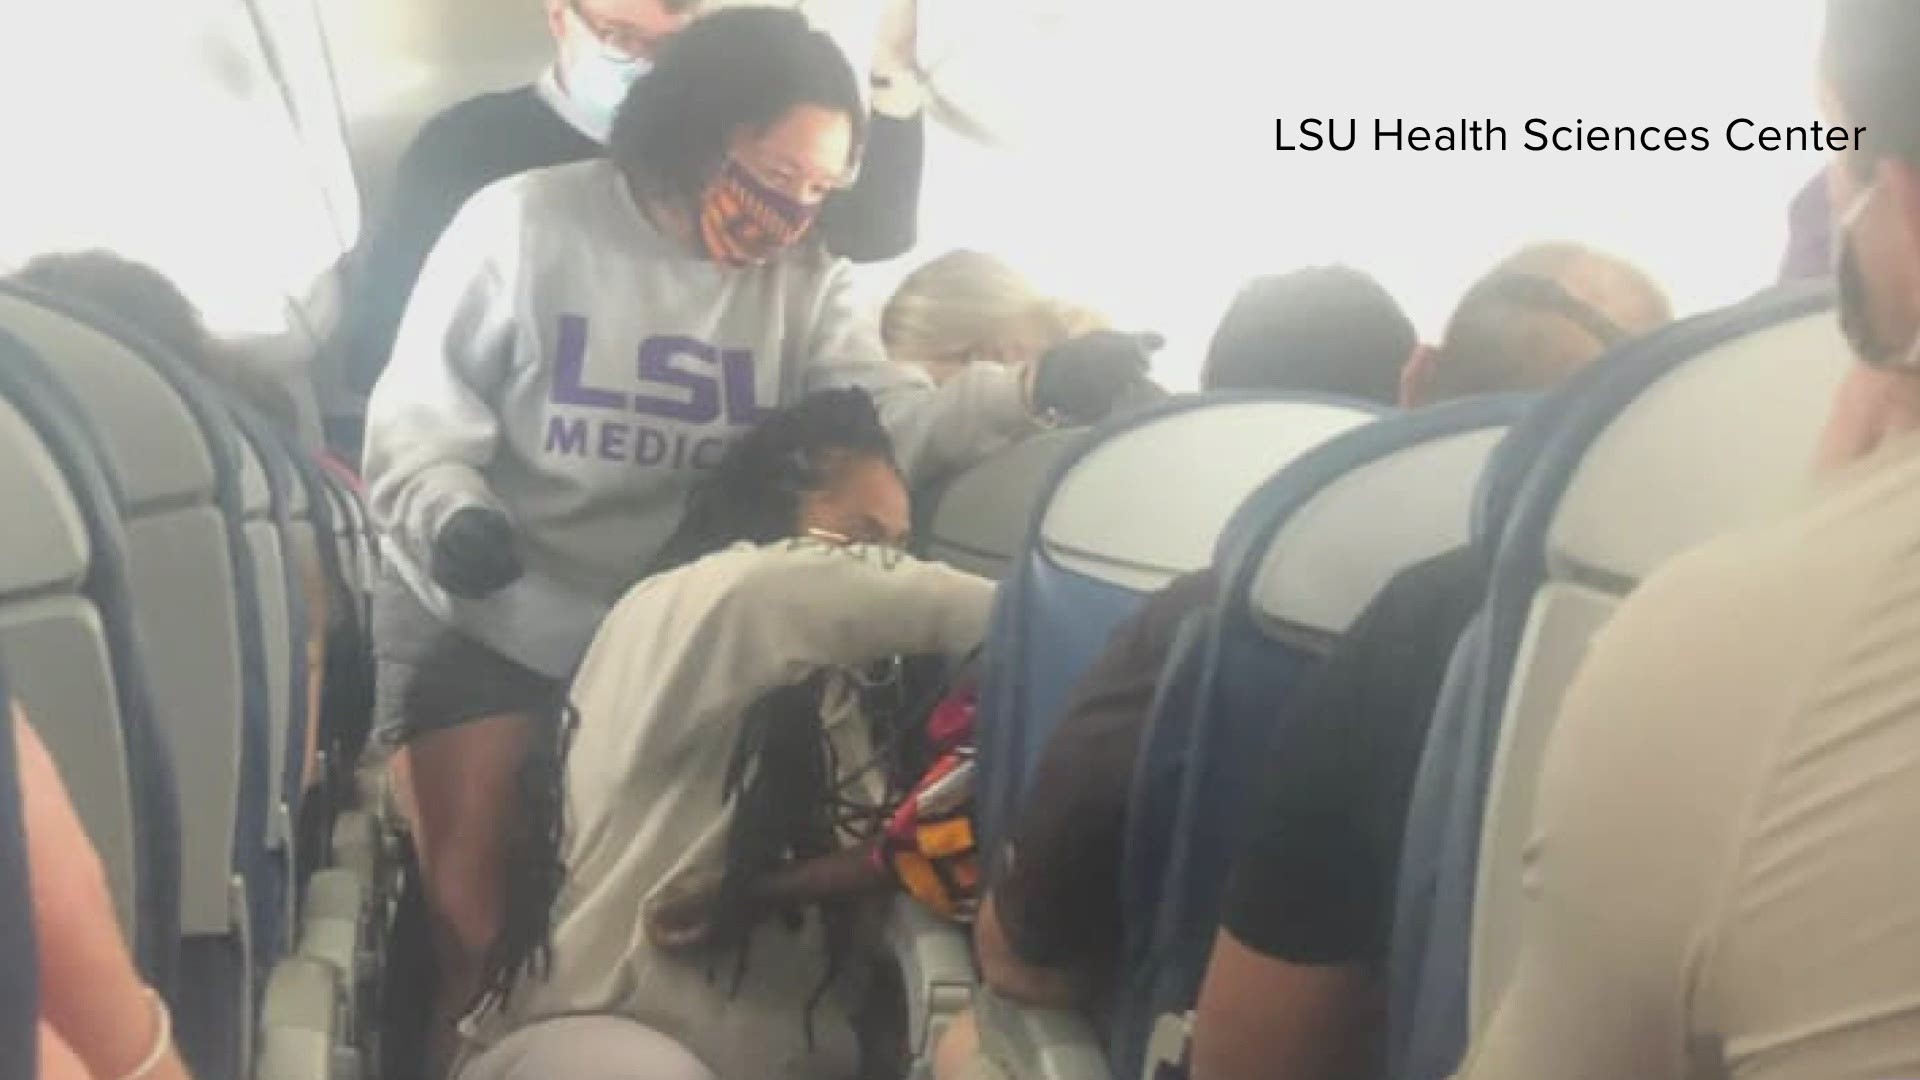 Two LSU Health students were honored by the city for their quick think when a passenger needed emergency help on a flight.